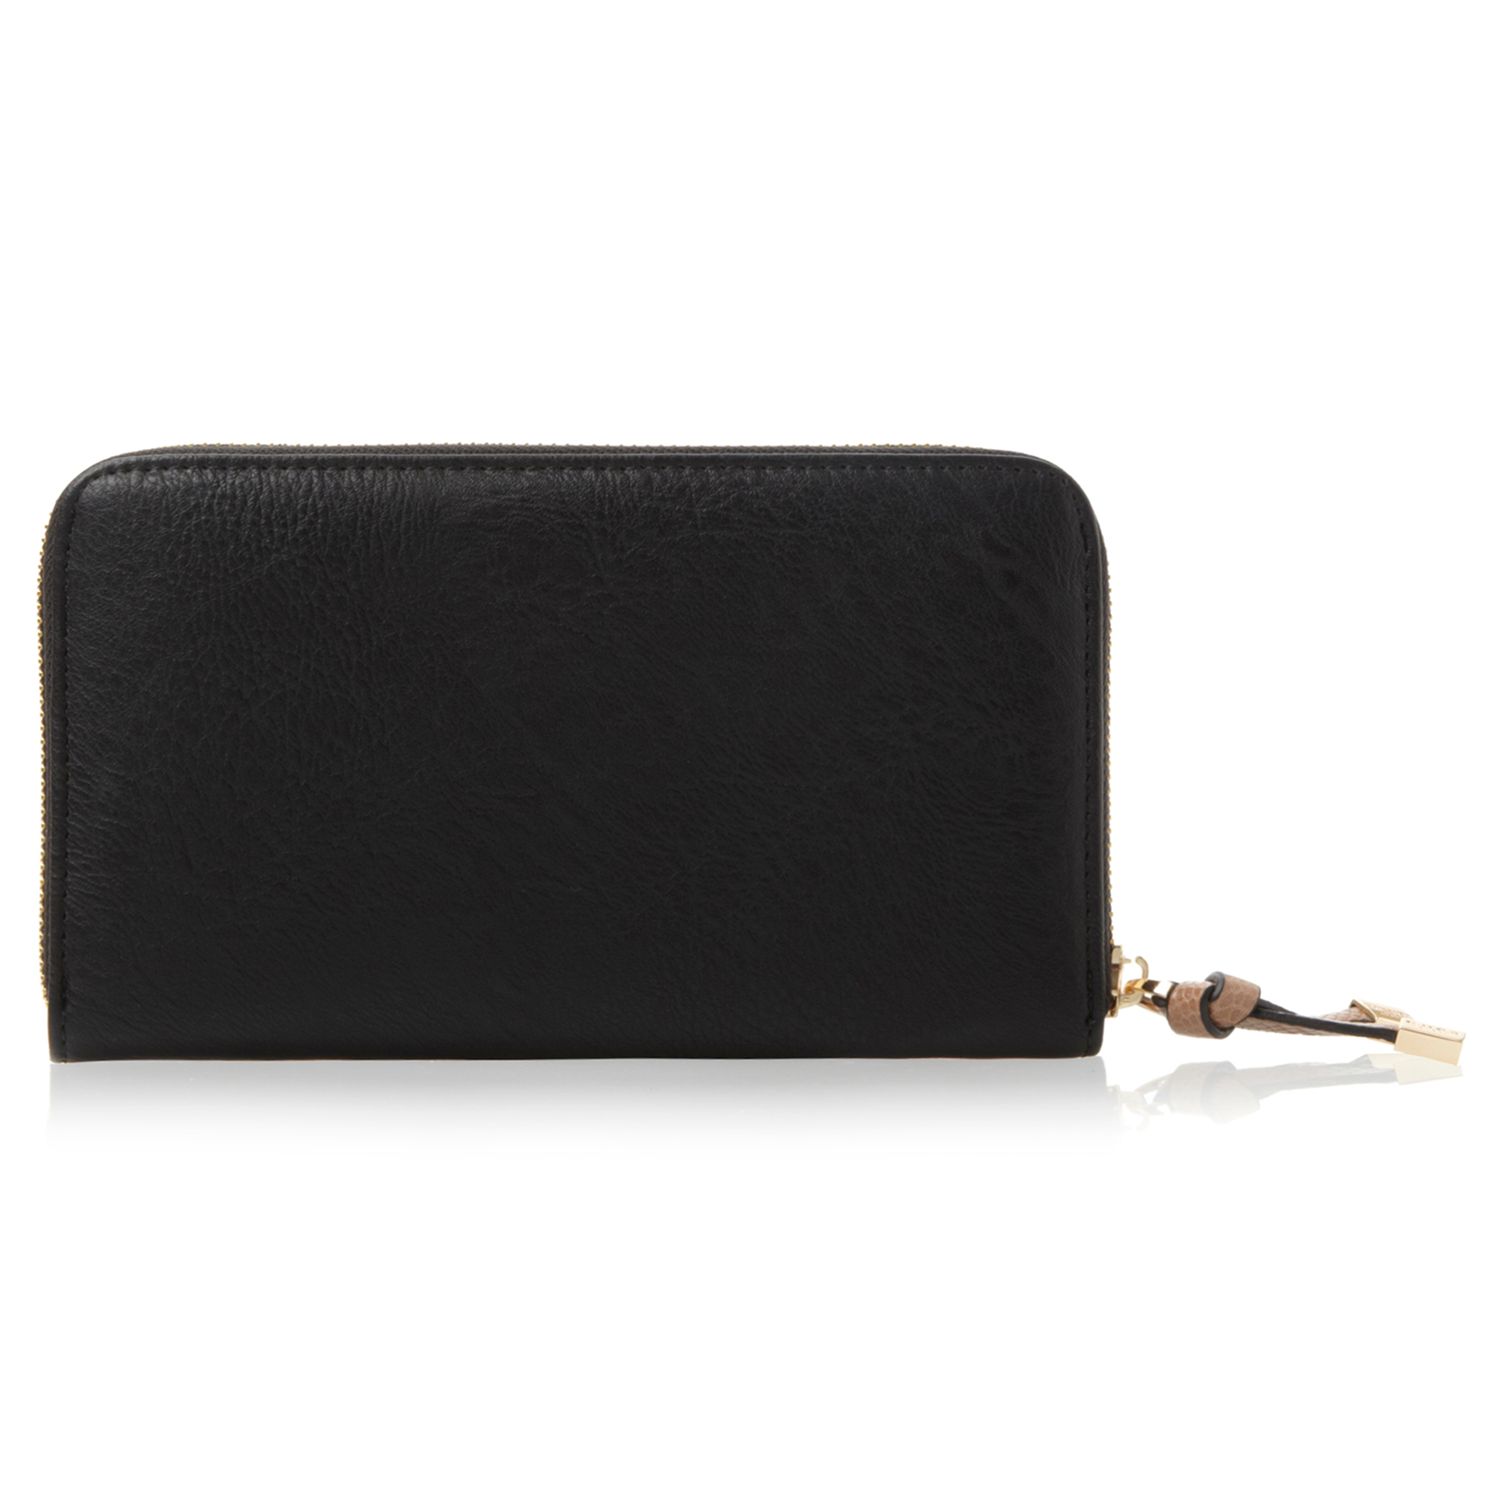 Dune Kpolly Removable Pocket Zip Purse